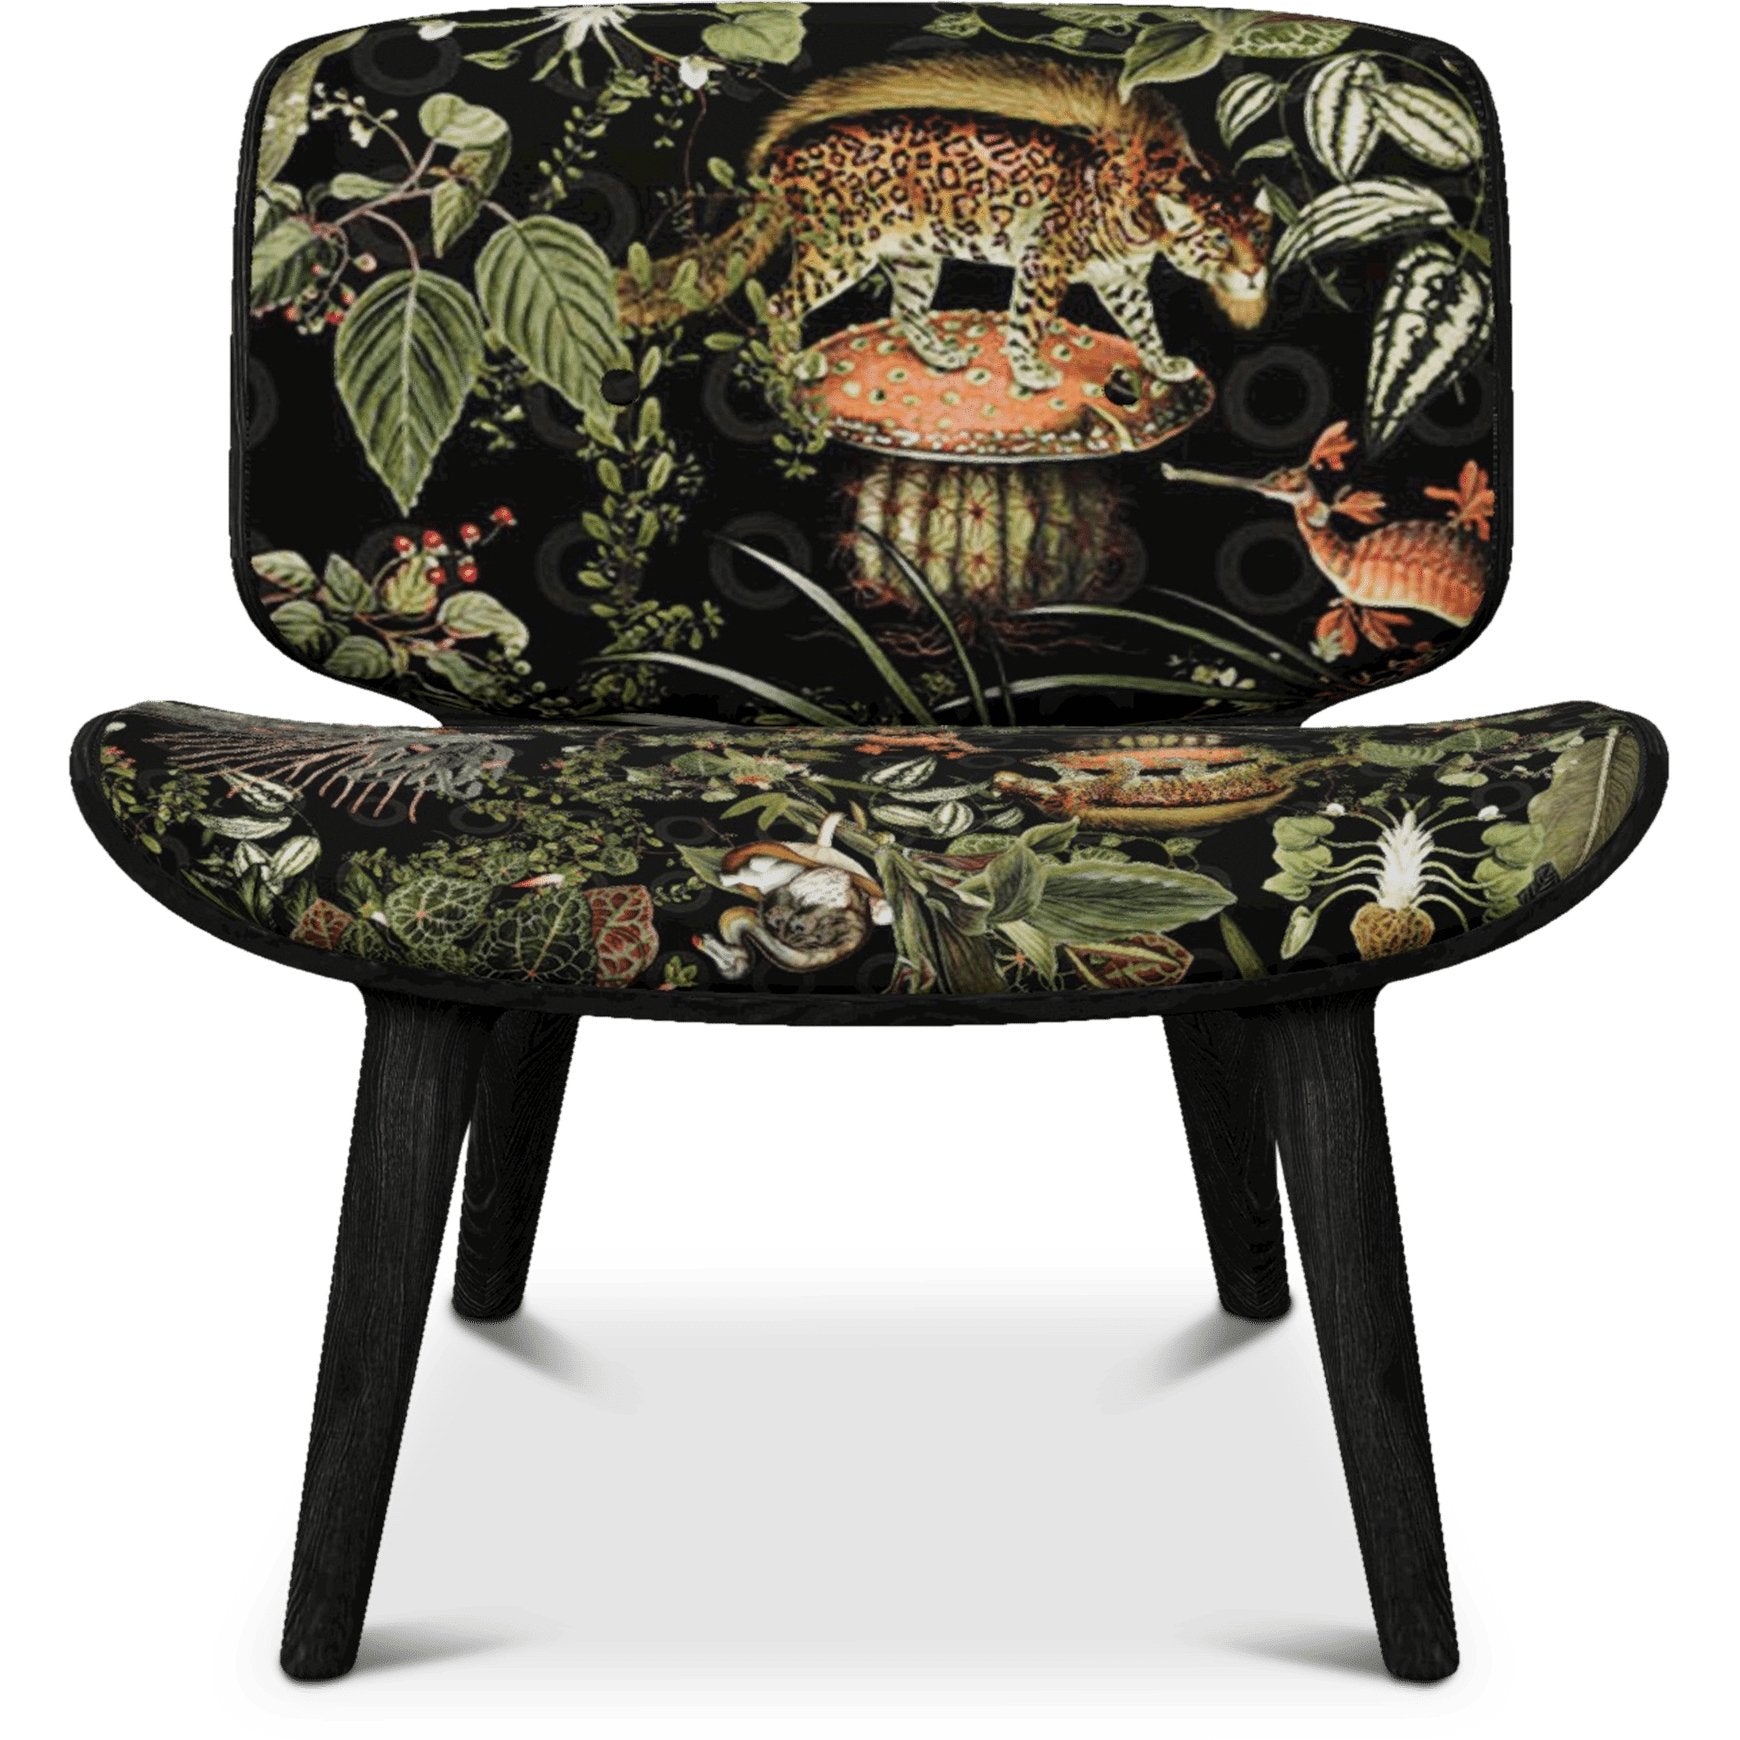 Nut Lounge Chair - Curated - Furniture - Moooi